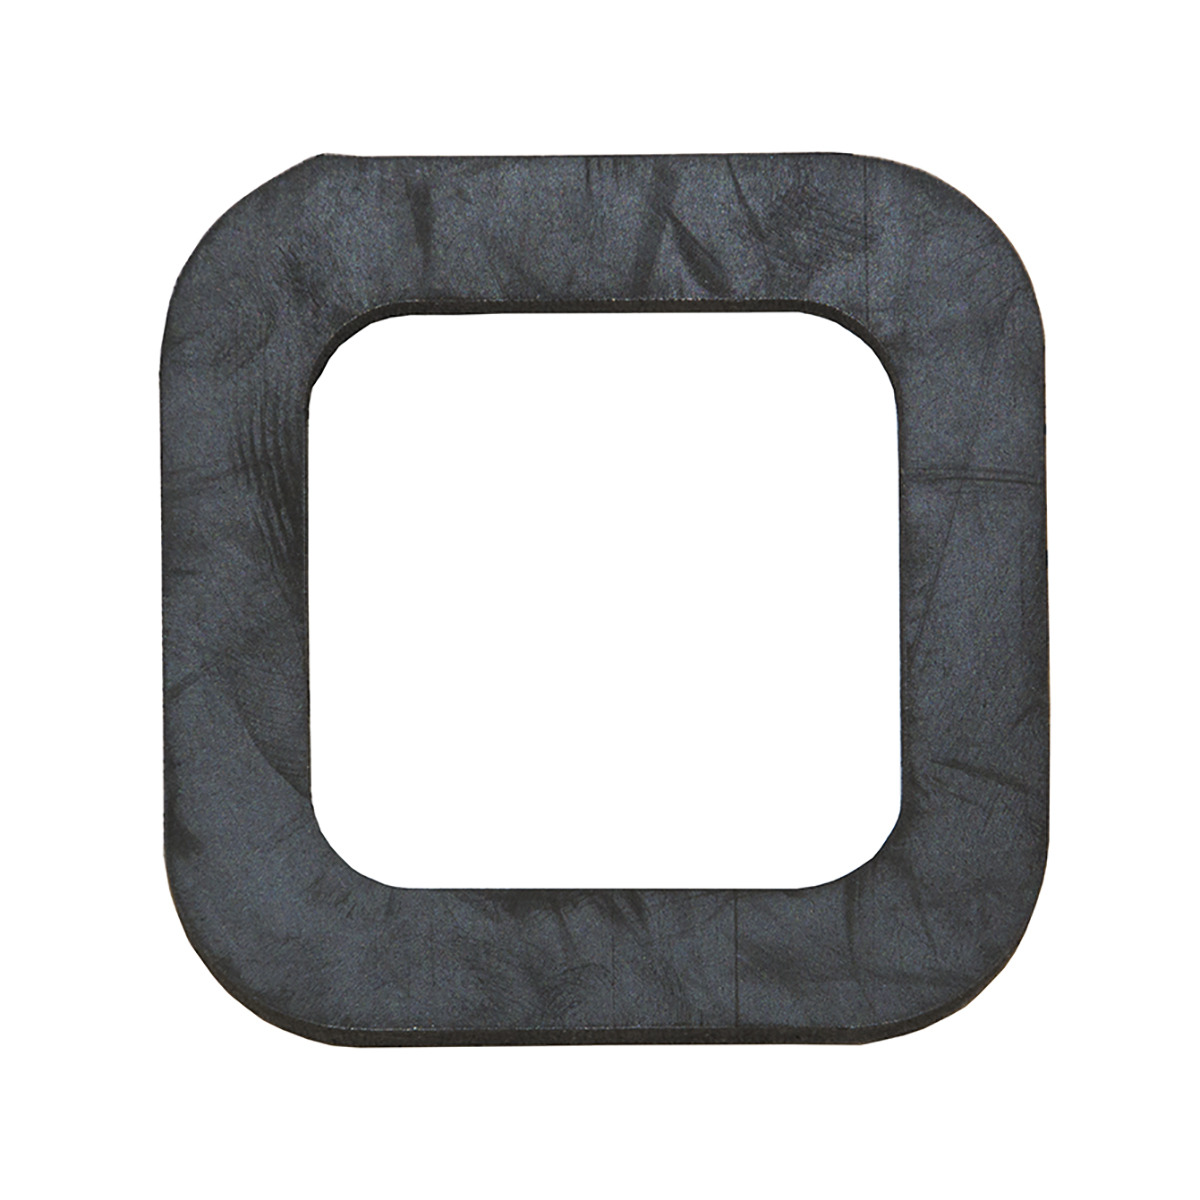 Towing Receiver Silencer Pad